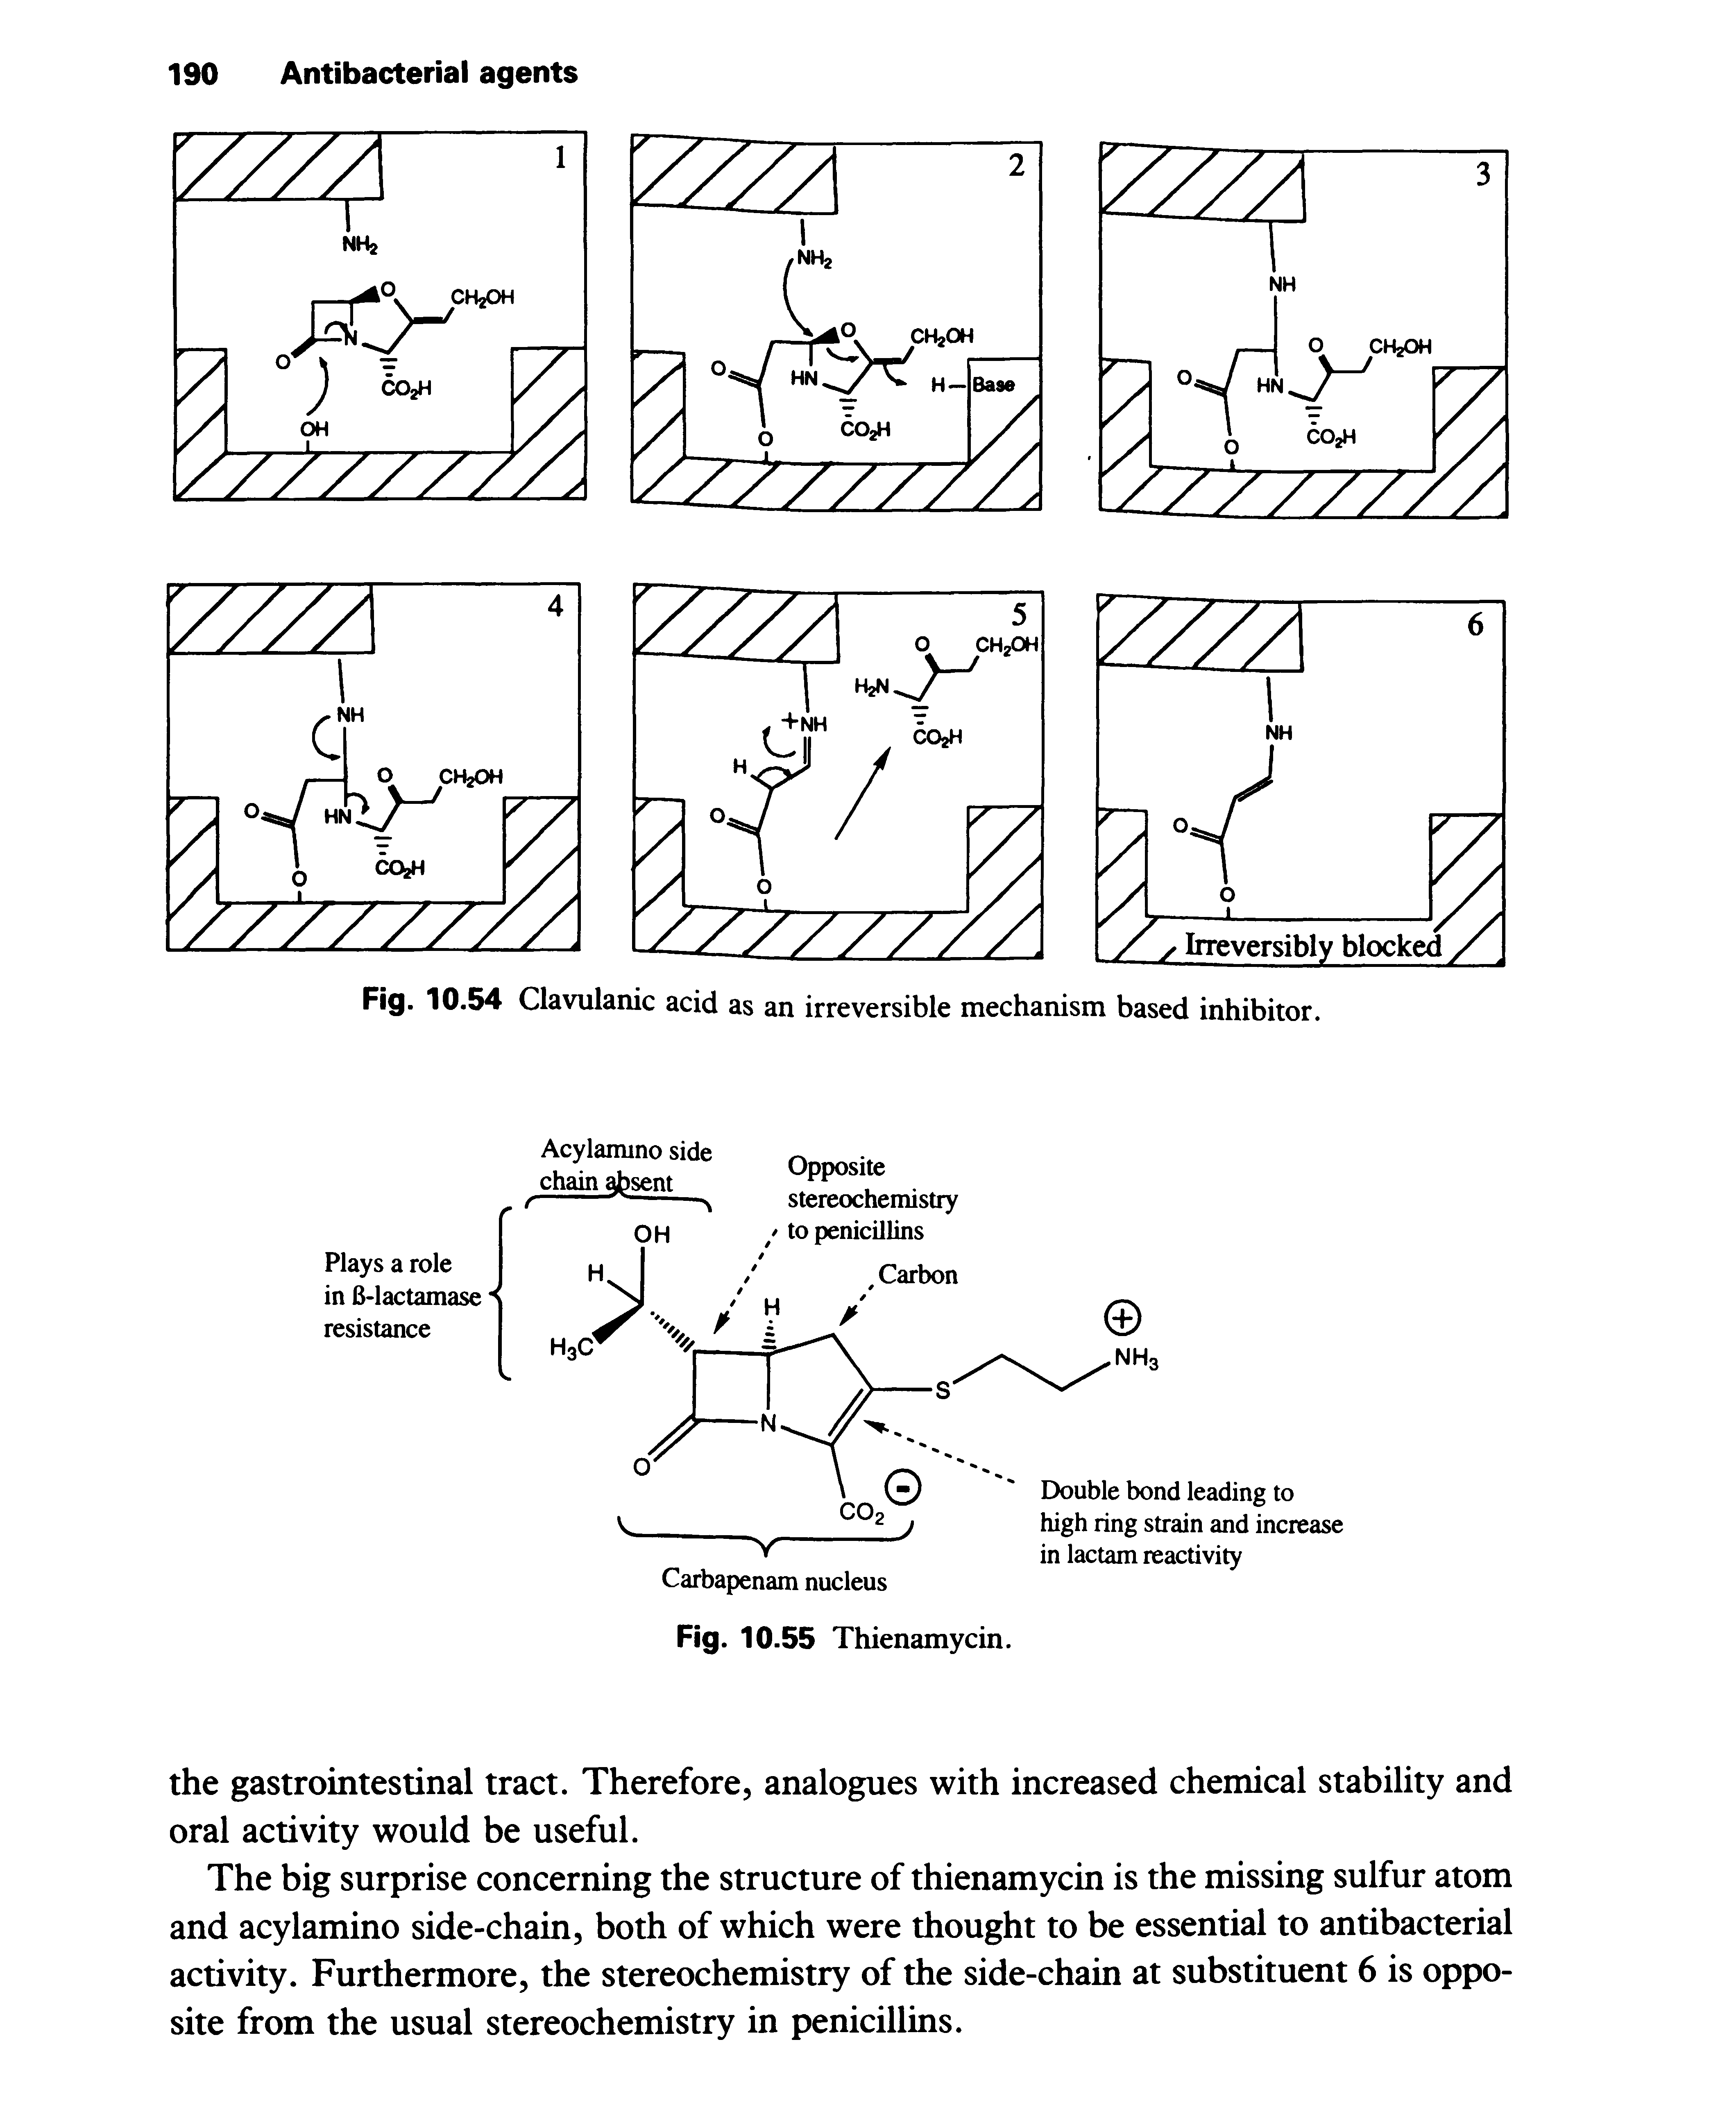 Fig. 10.54 Clavulanic acid as an irreversible mechanism based inhibitor.